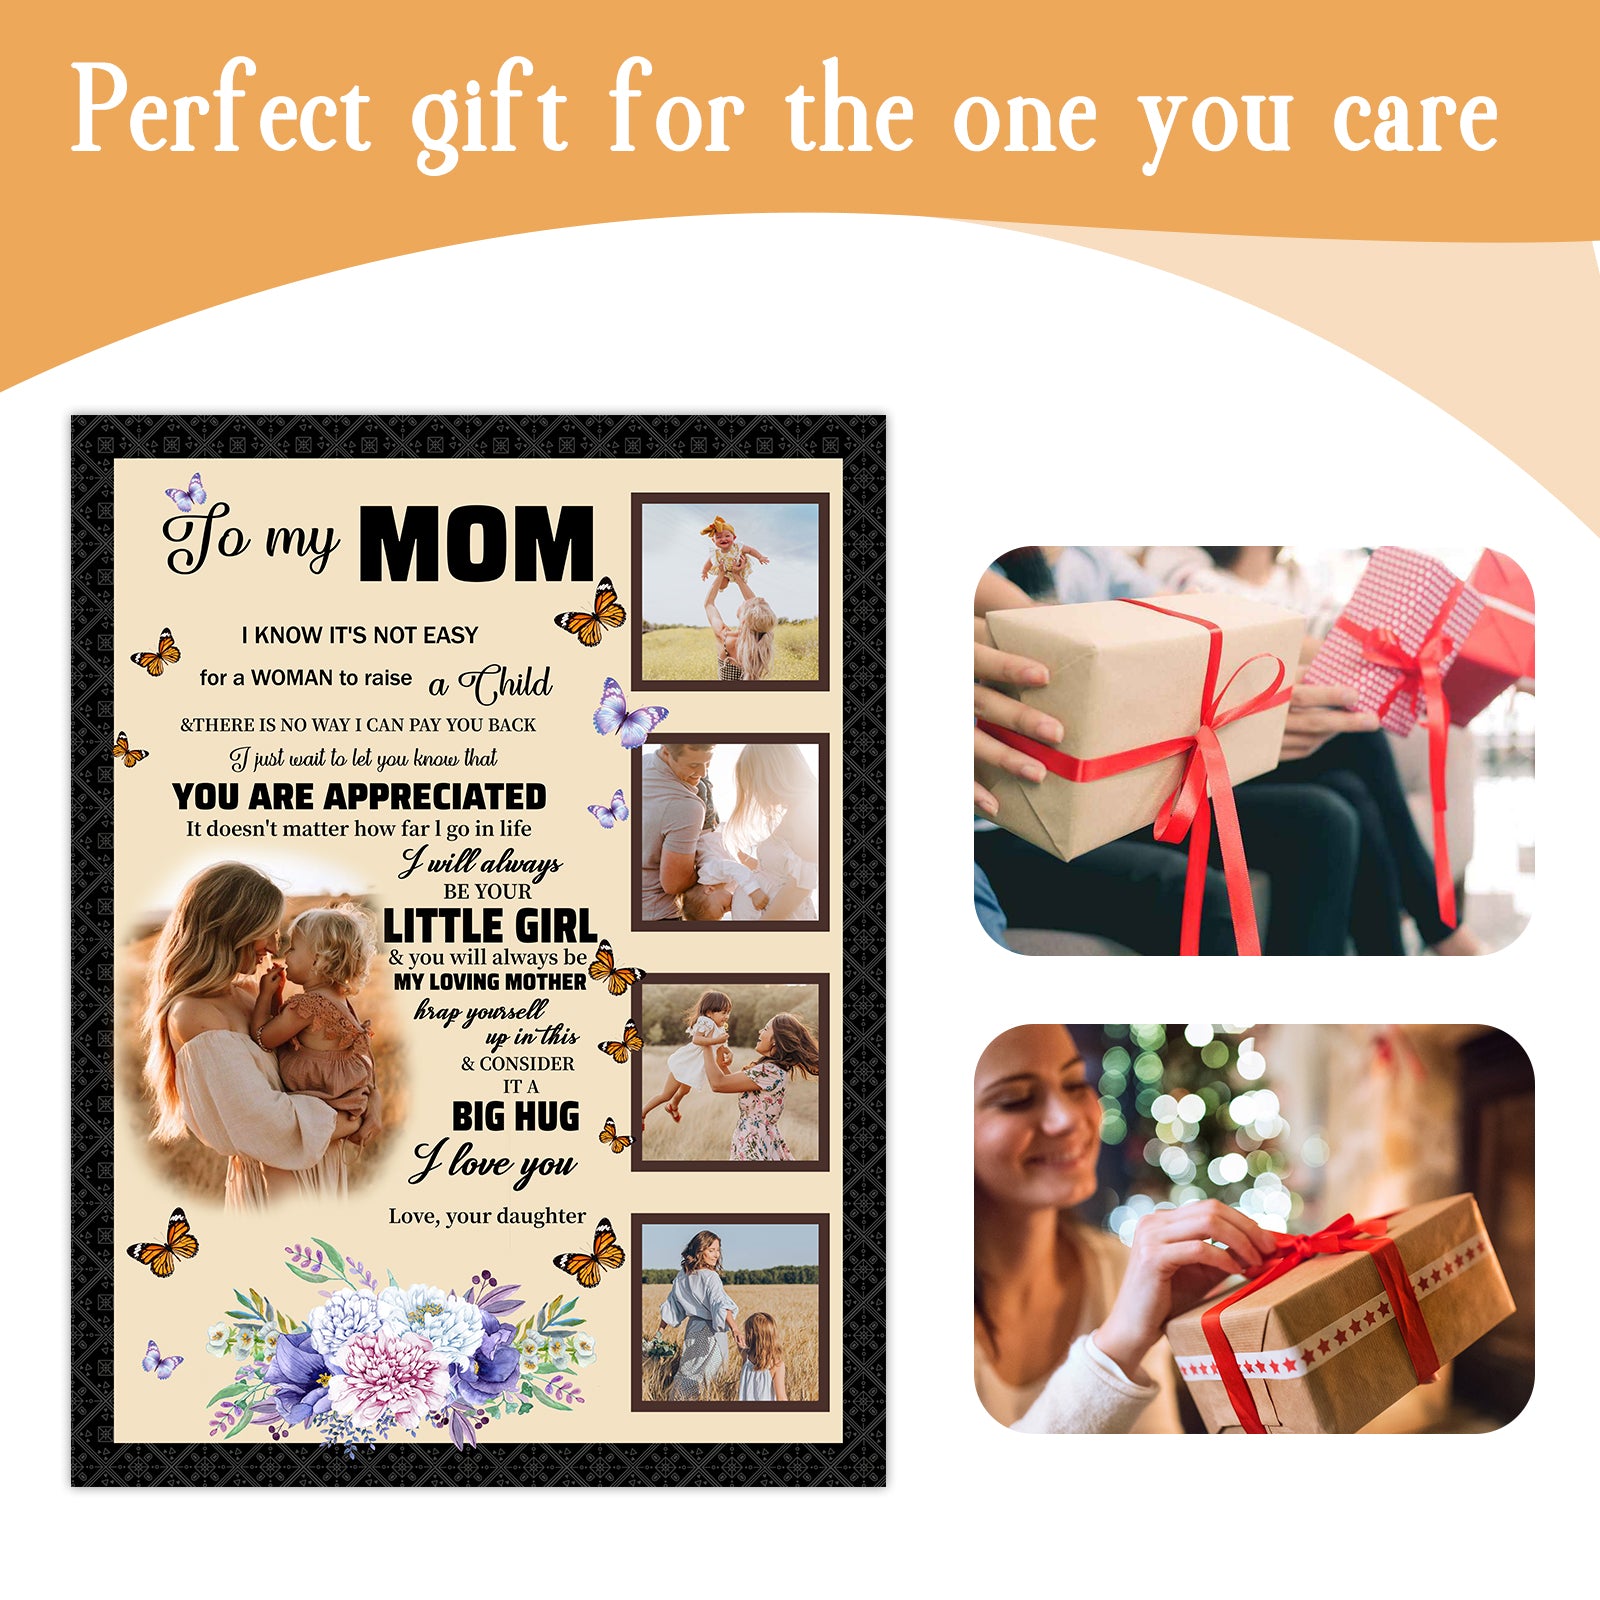 Personalized "For My MOM" blanket with photo - perfect Mother's Day gift to show love and appreciation. - colorfulcustom